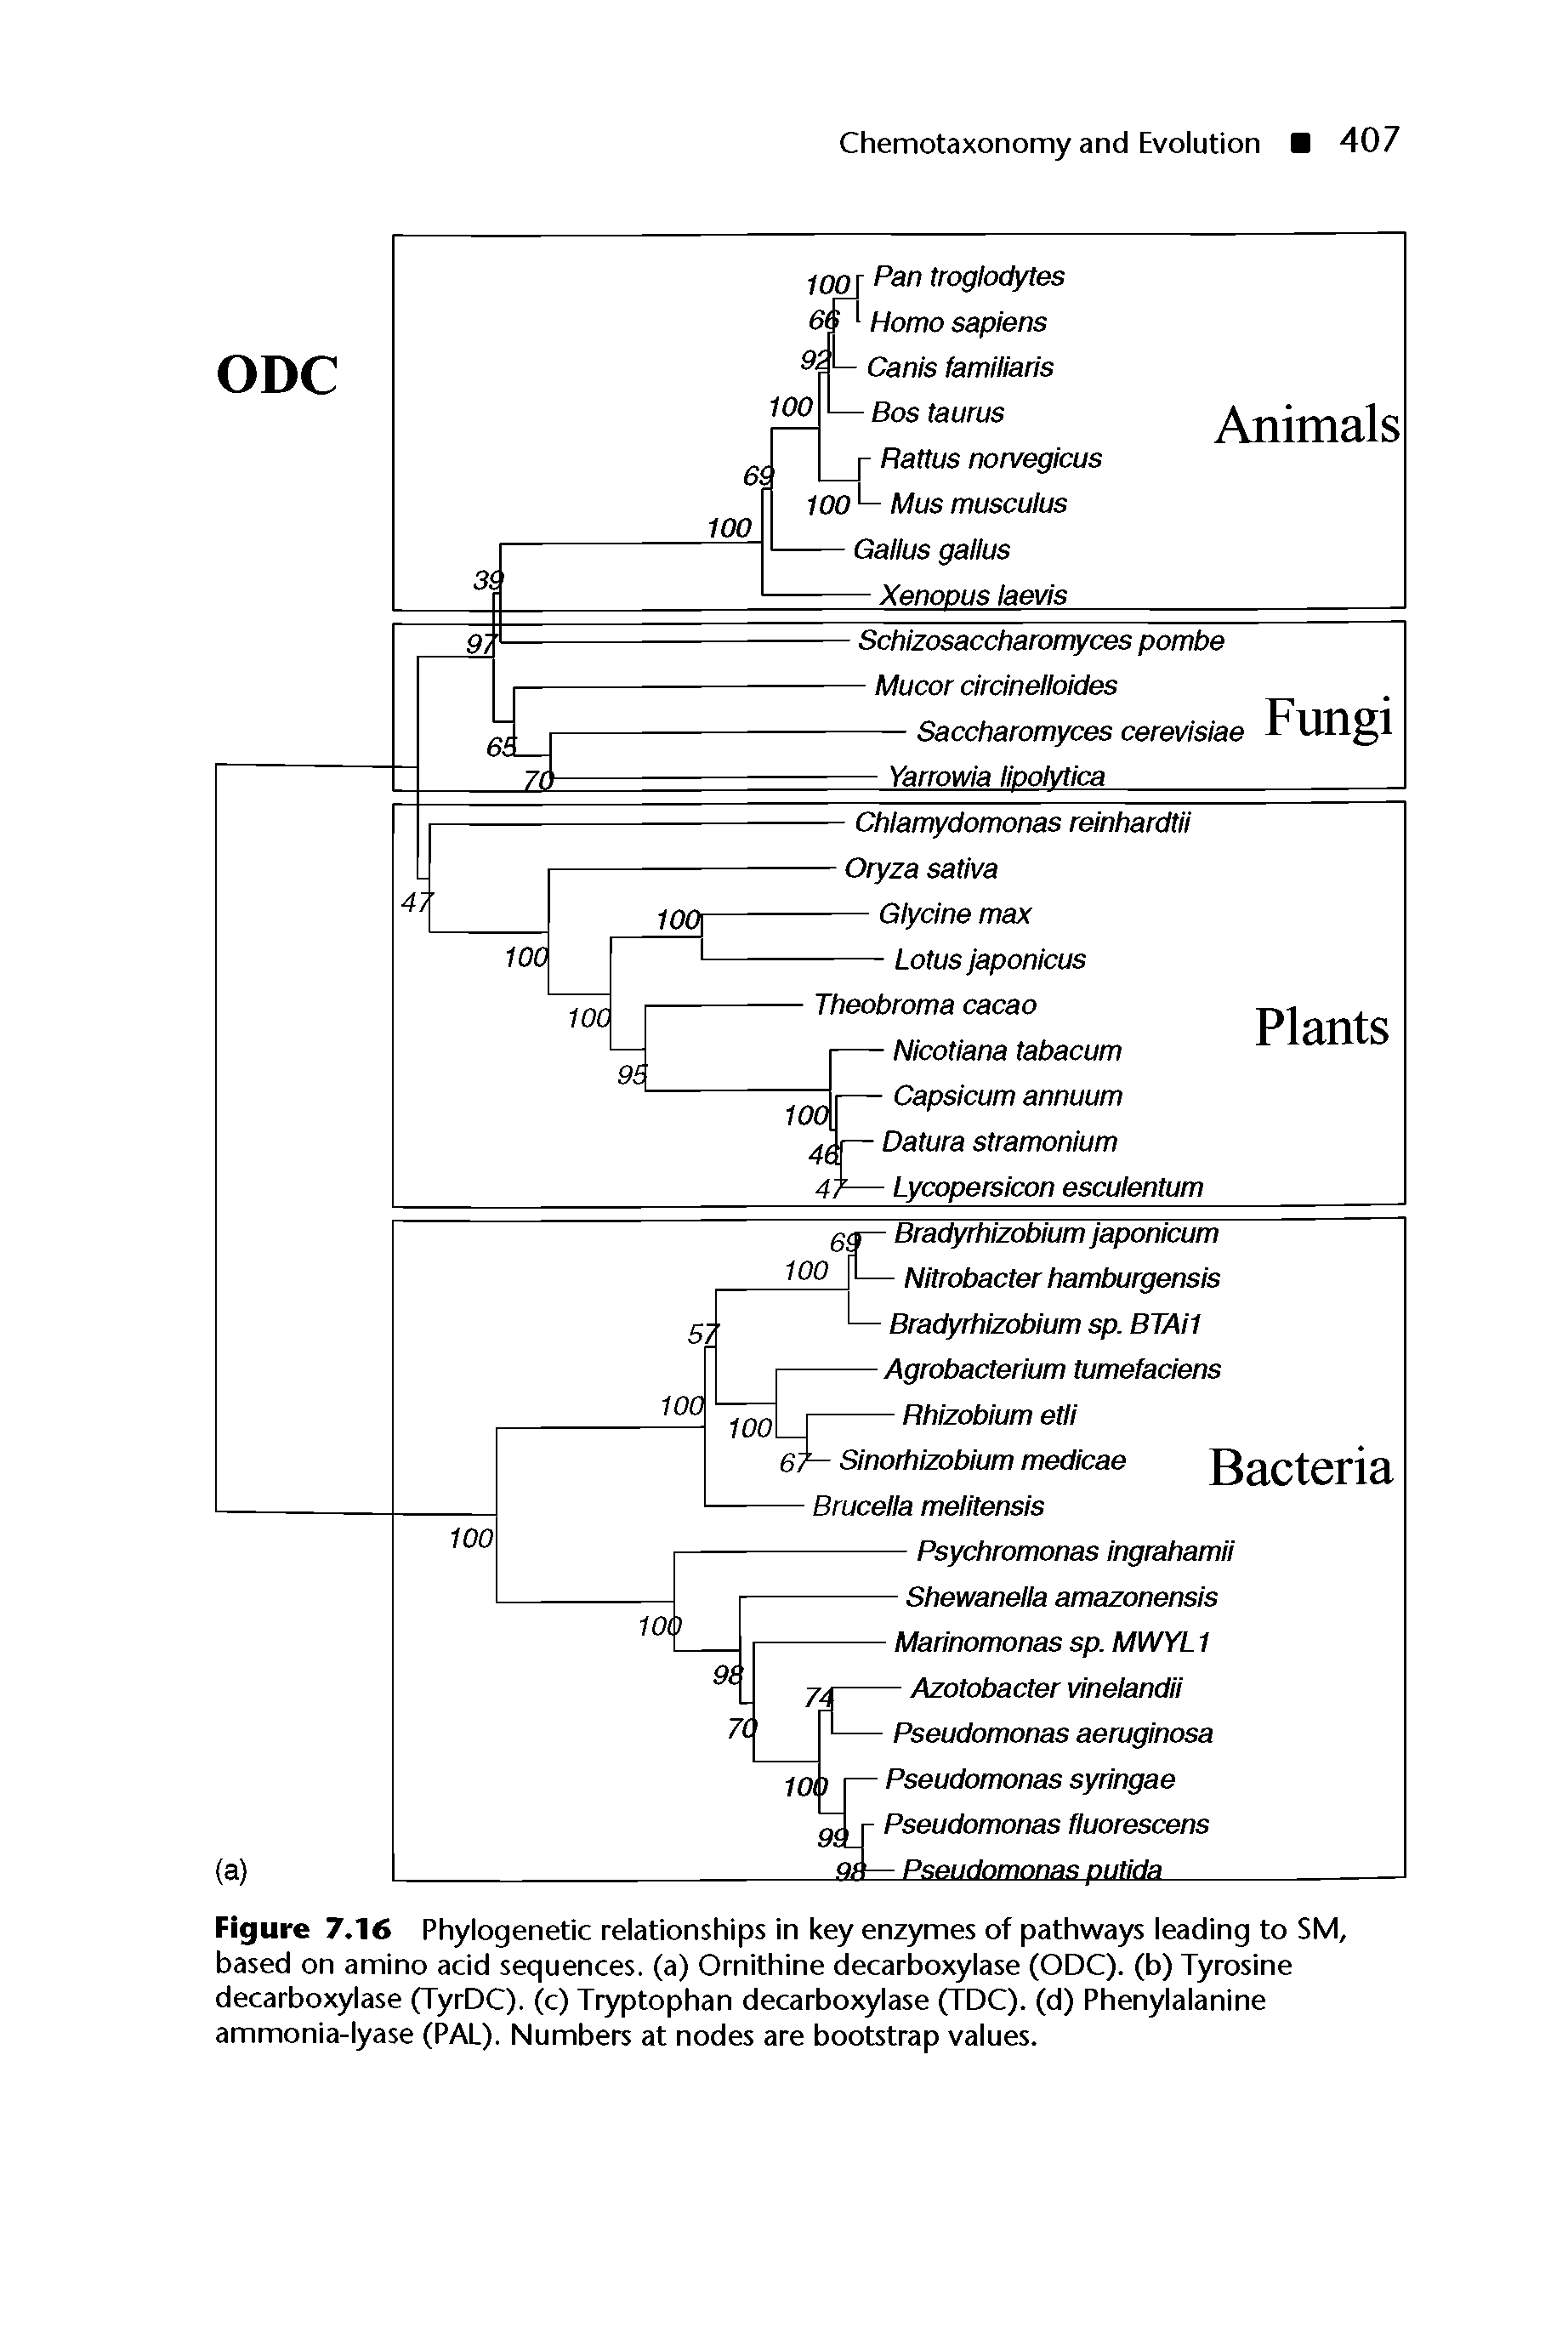 Figure 7.16 Phylogenetic relationships in key enzymes of pathways leading to SM, based on amino acid sequences, (a) Ornithine decarboxylase (ODC). (b) Tyrosine decarboxylase (TyrDC). (c) Tryptophan decarboxylase (TDC). (d) Phenylalanine ammonia-lyase (PAL). Numbers at nodes are bootstrap values.